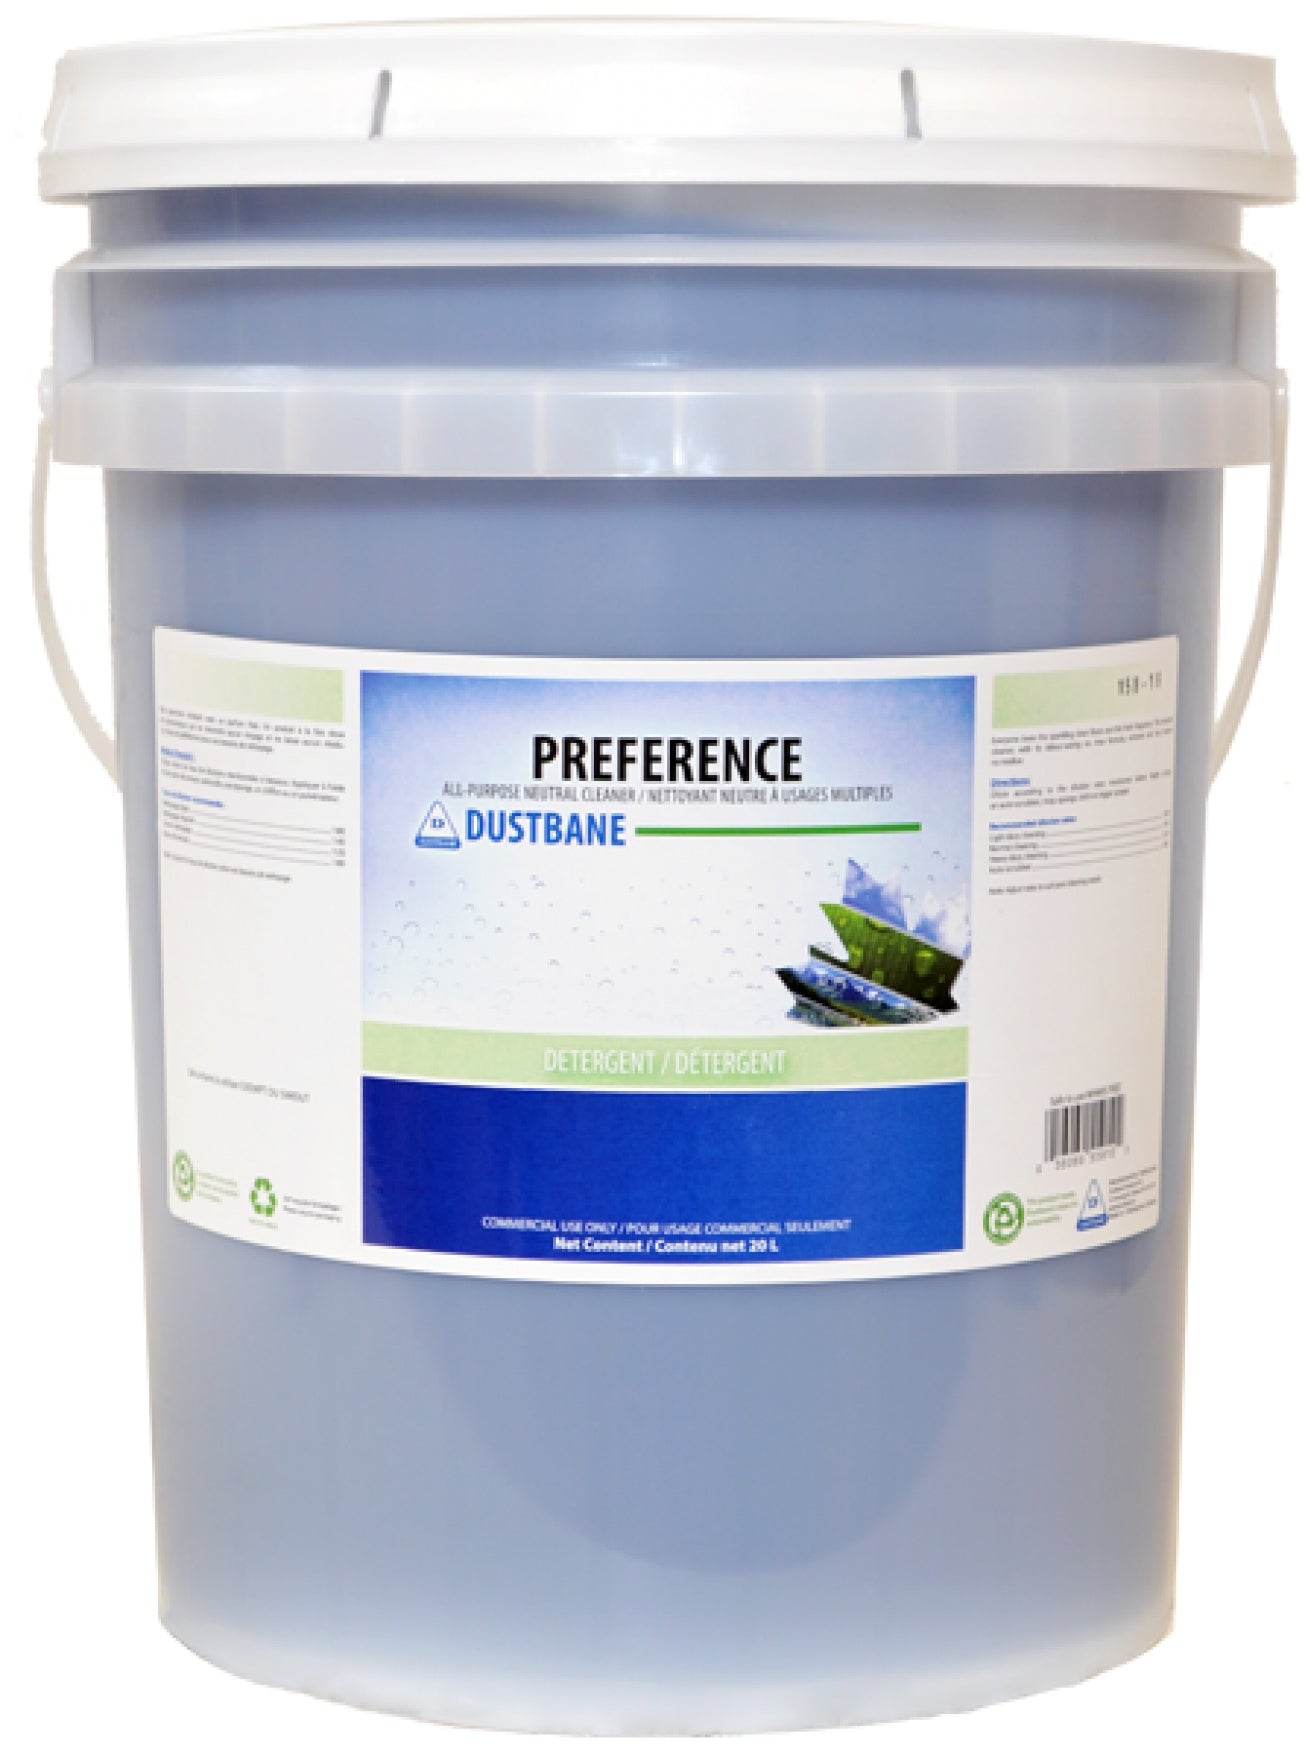 20L DUSTBANE® PREFERENCE™ ALL PURPOSE NEUTRAL CLEANER, CONCENTRATE